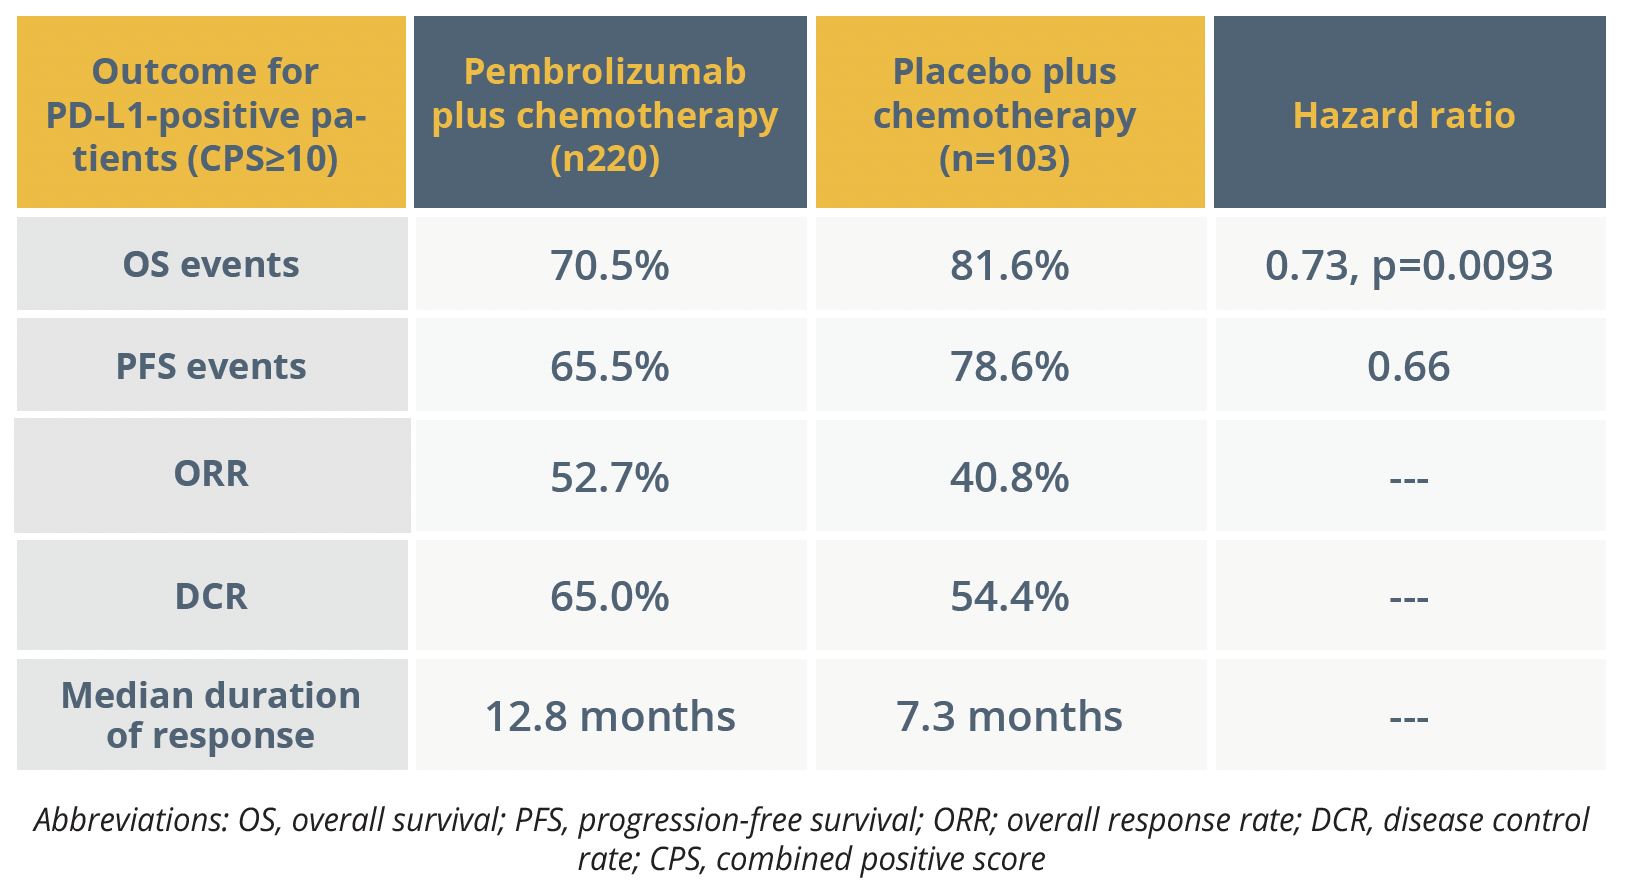 Superior outcomes with the addition of pembrolizumab to chemotherapy in triple negative breast cancer